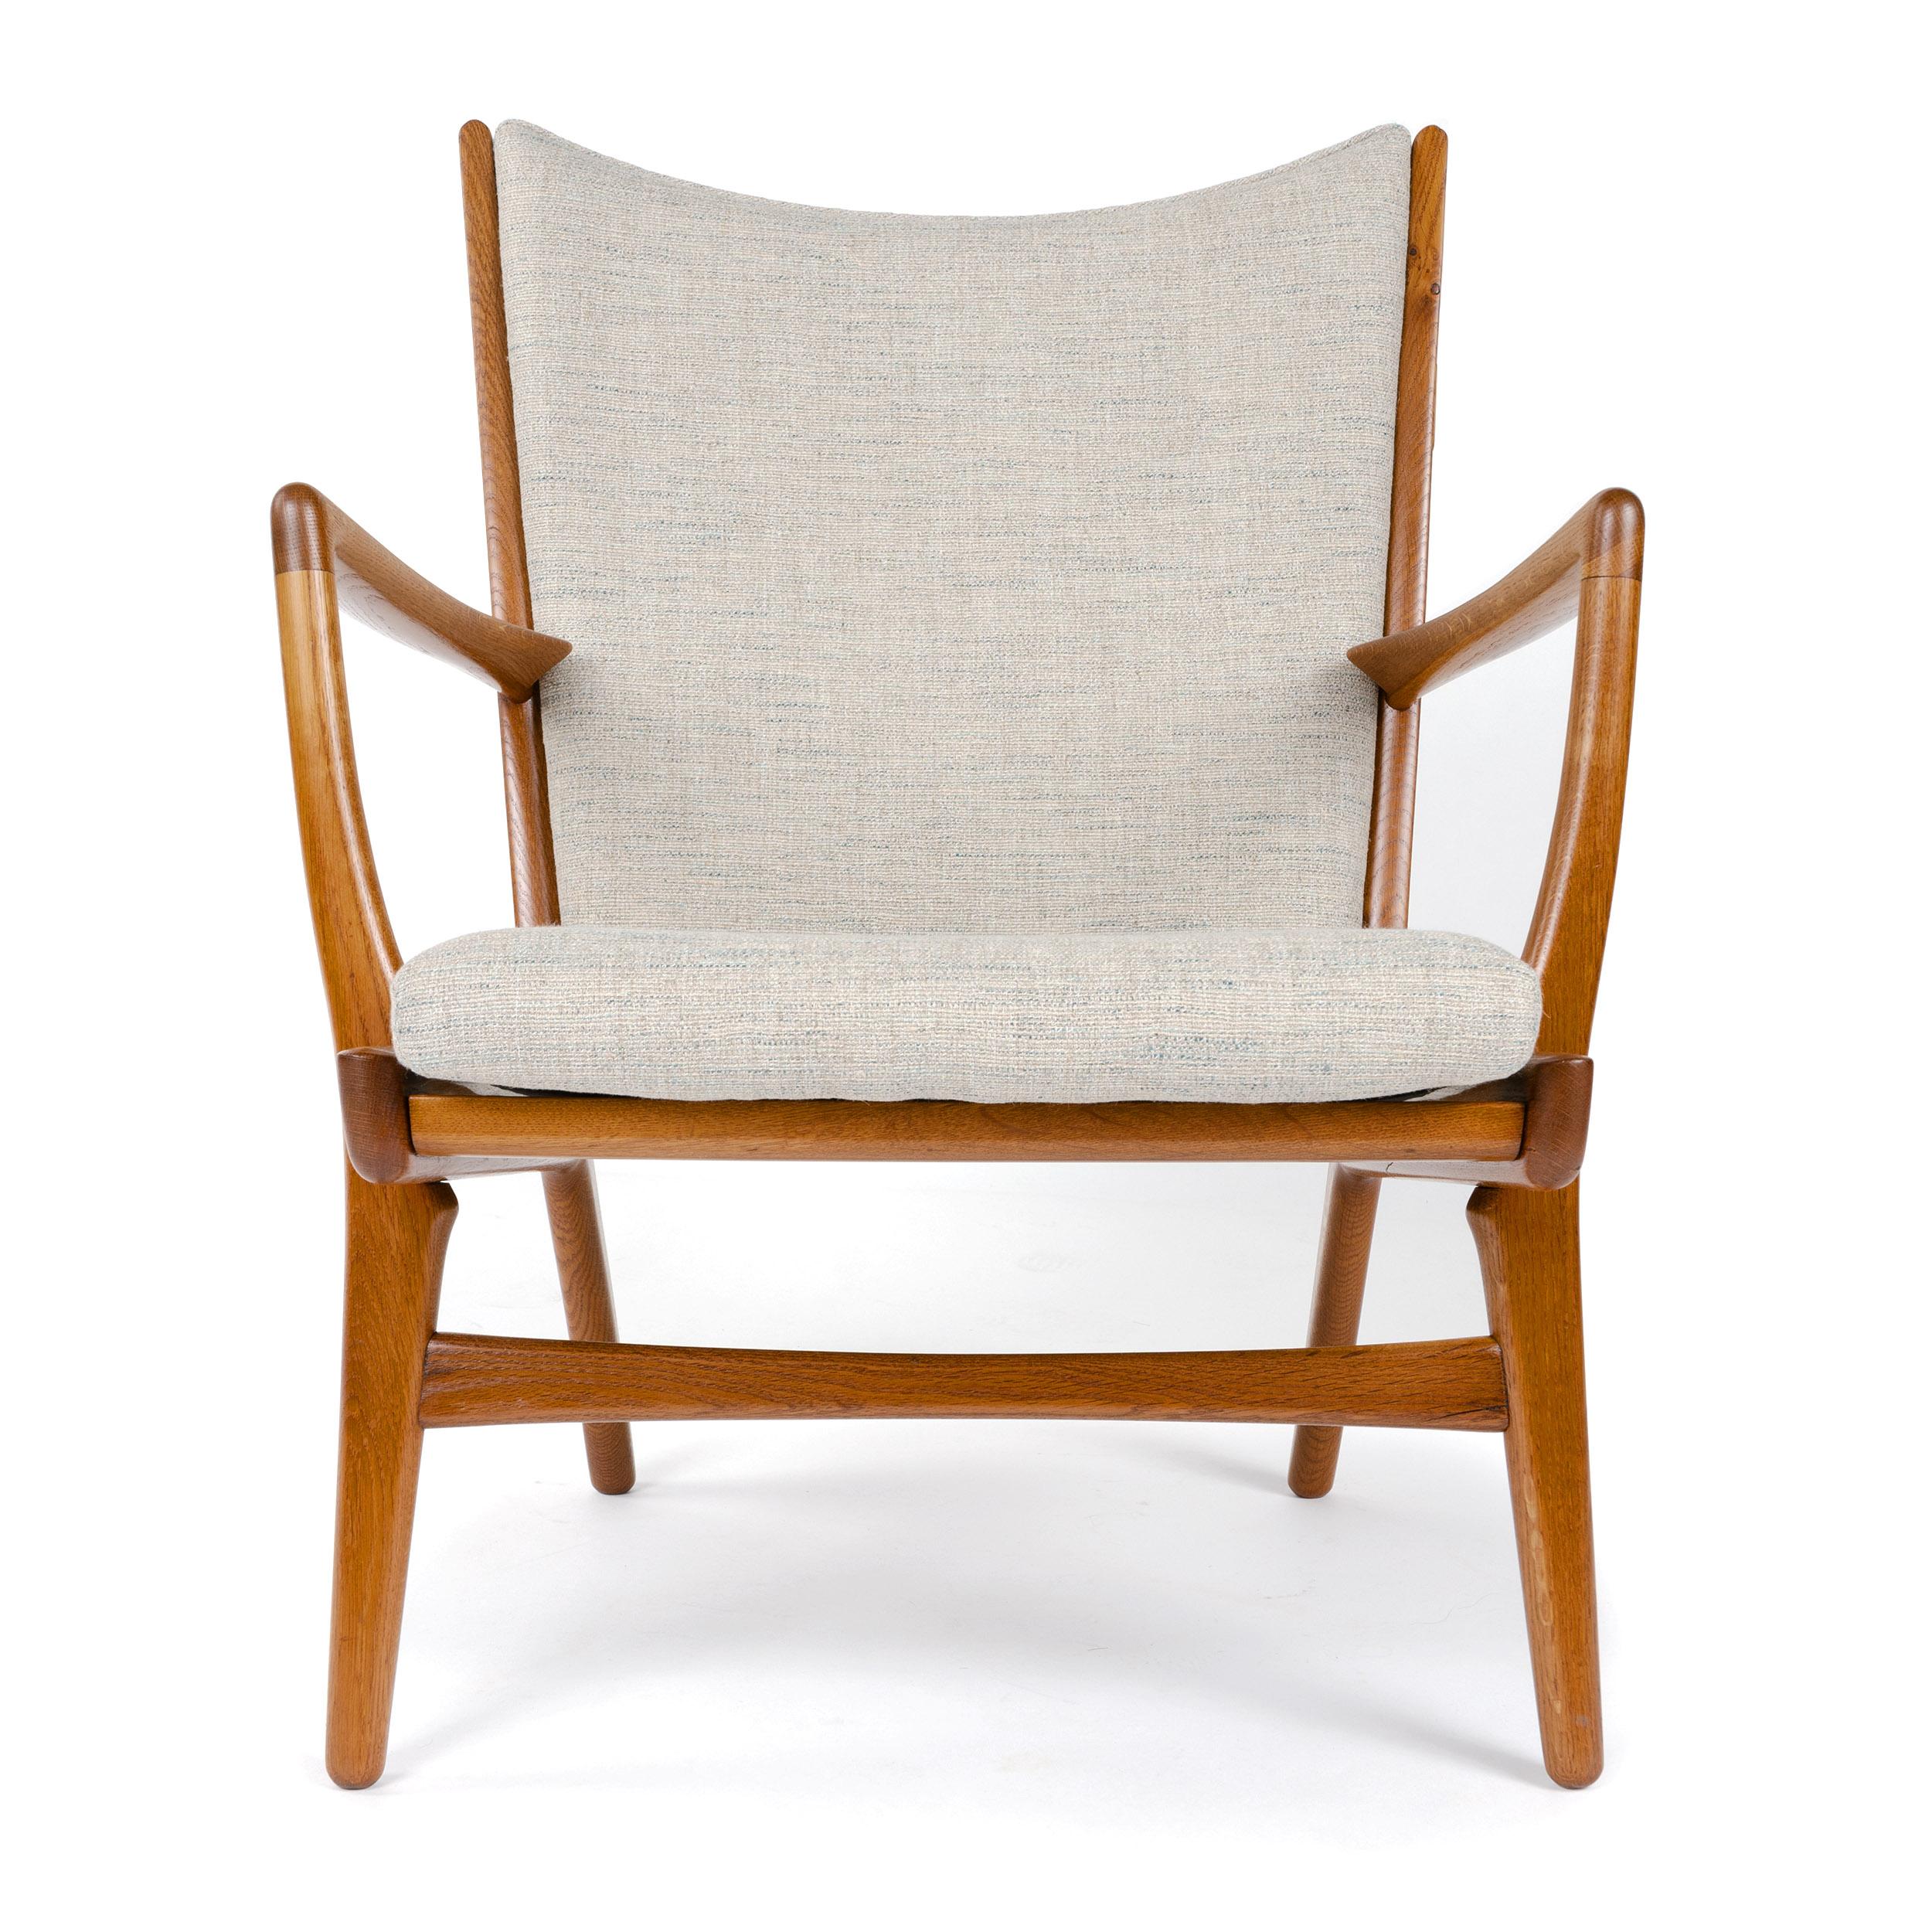 A pair of Danish modern lounge chairs designed by Hans Wegner. Original oakwood frames with upholstery by our workshop. Manufactured by A.P. Stolen, circa 1950s.